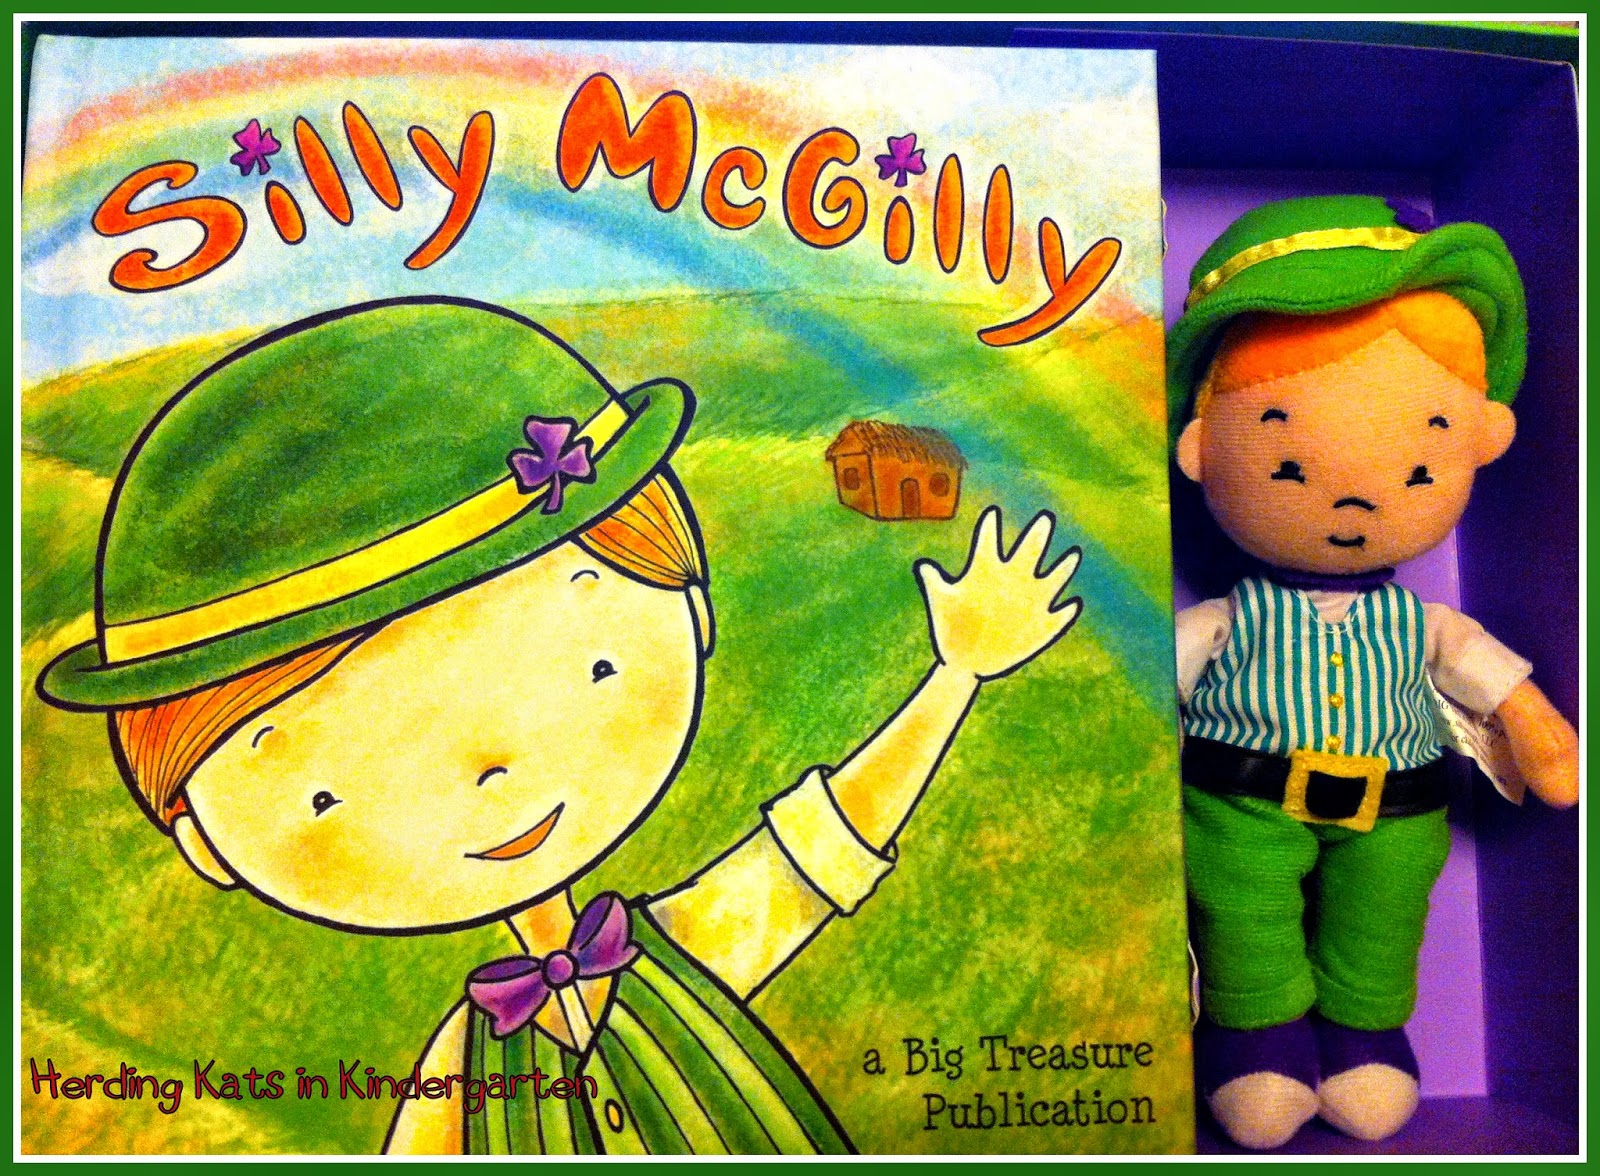 http://www.sillymcgilly.com/home.html